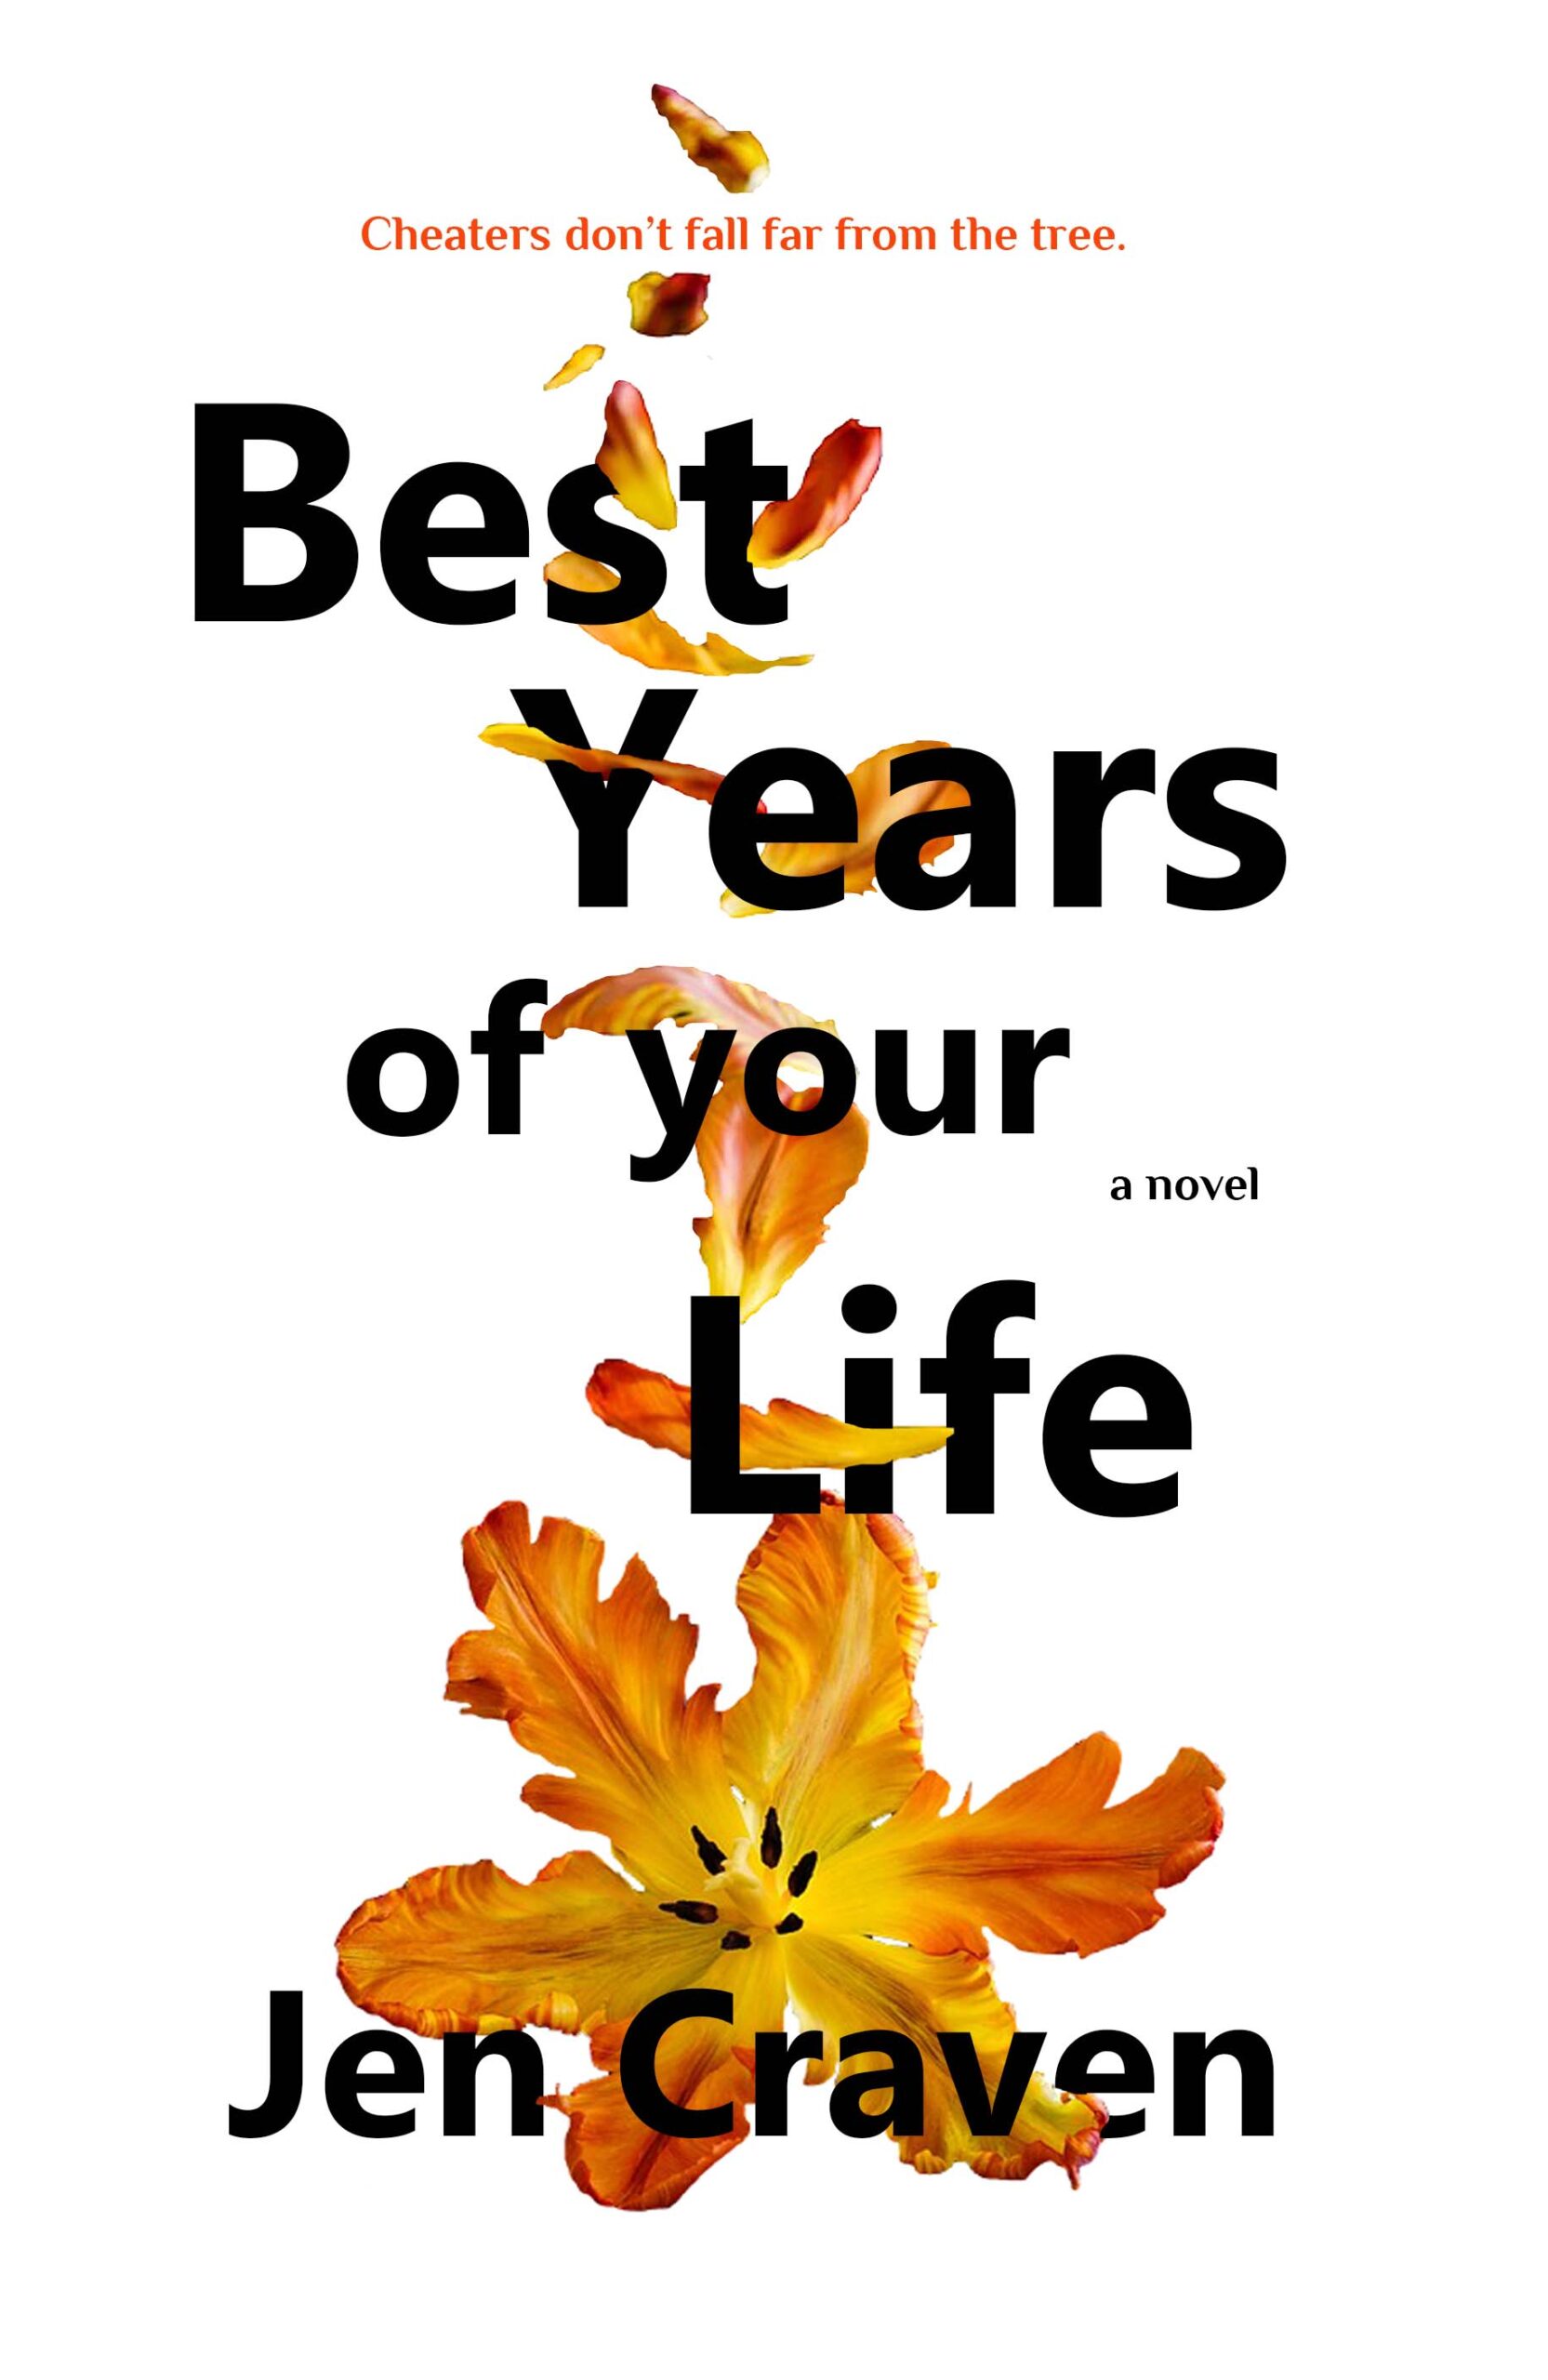 Best Years of Your Life by Jen Craven